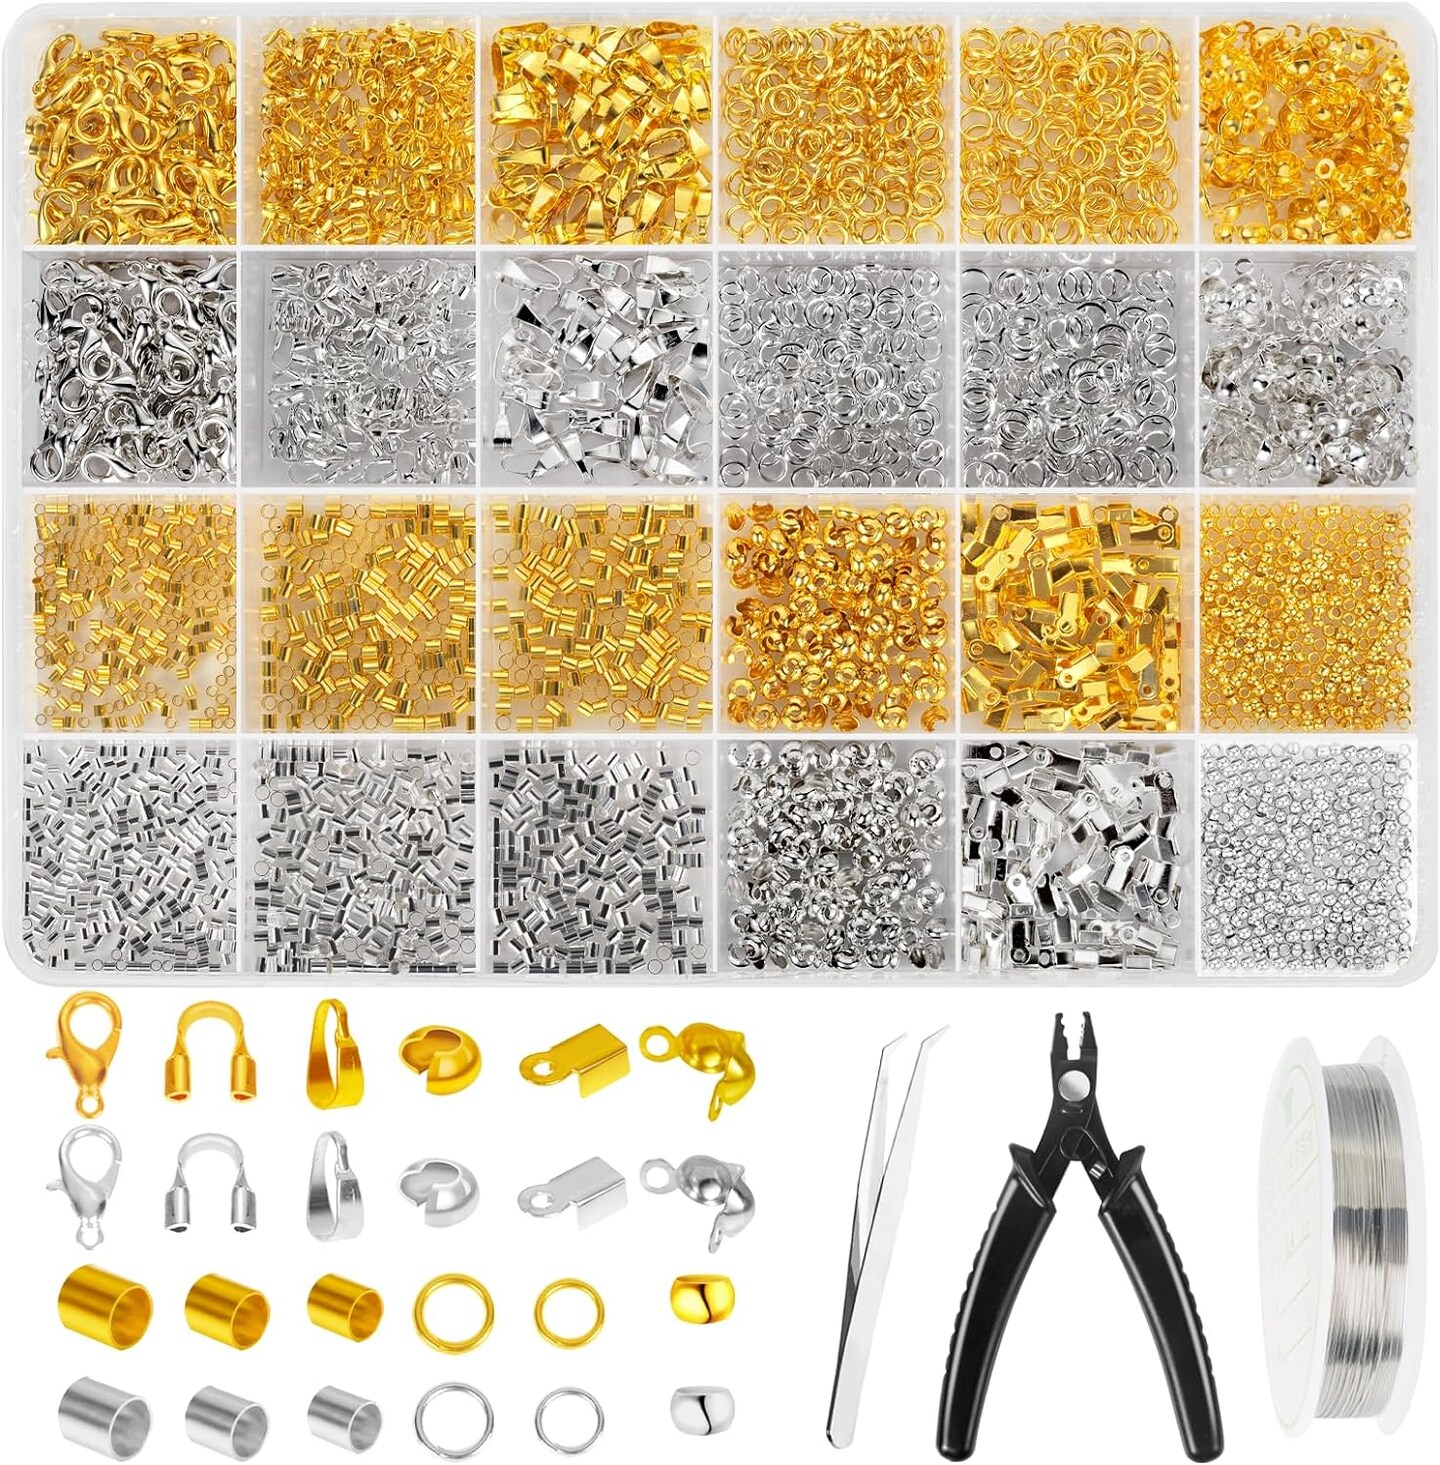 2120 PCS Crimp Beads for Jewelry Making Supplies, Bracelet Clasps and Closures, Golden Silver Crimp Covers &#x26; Tubes, Lobster Clasp Crimping Pliers and Beading Wire